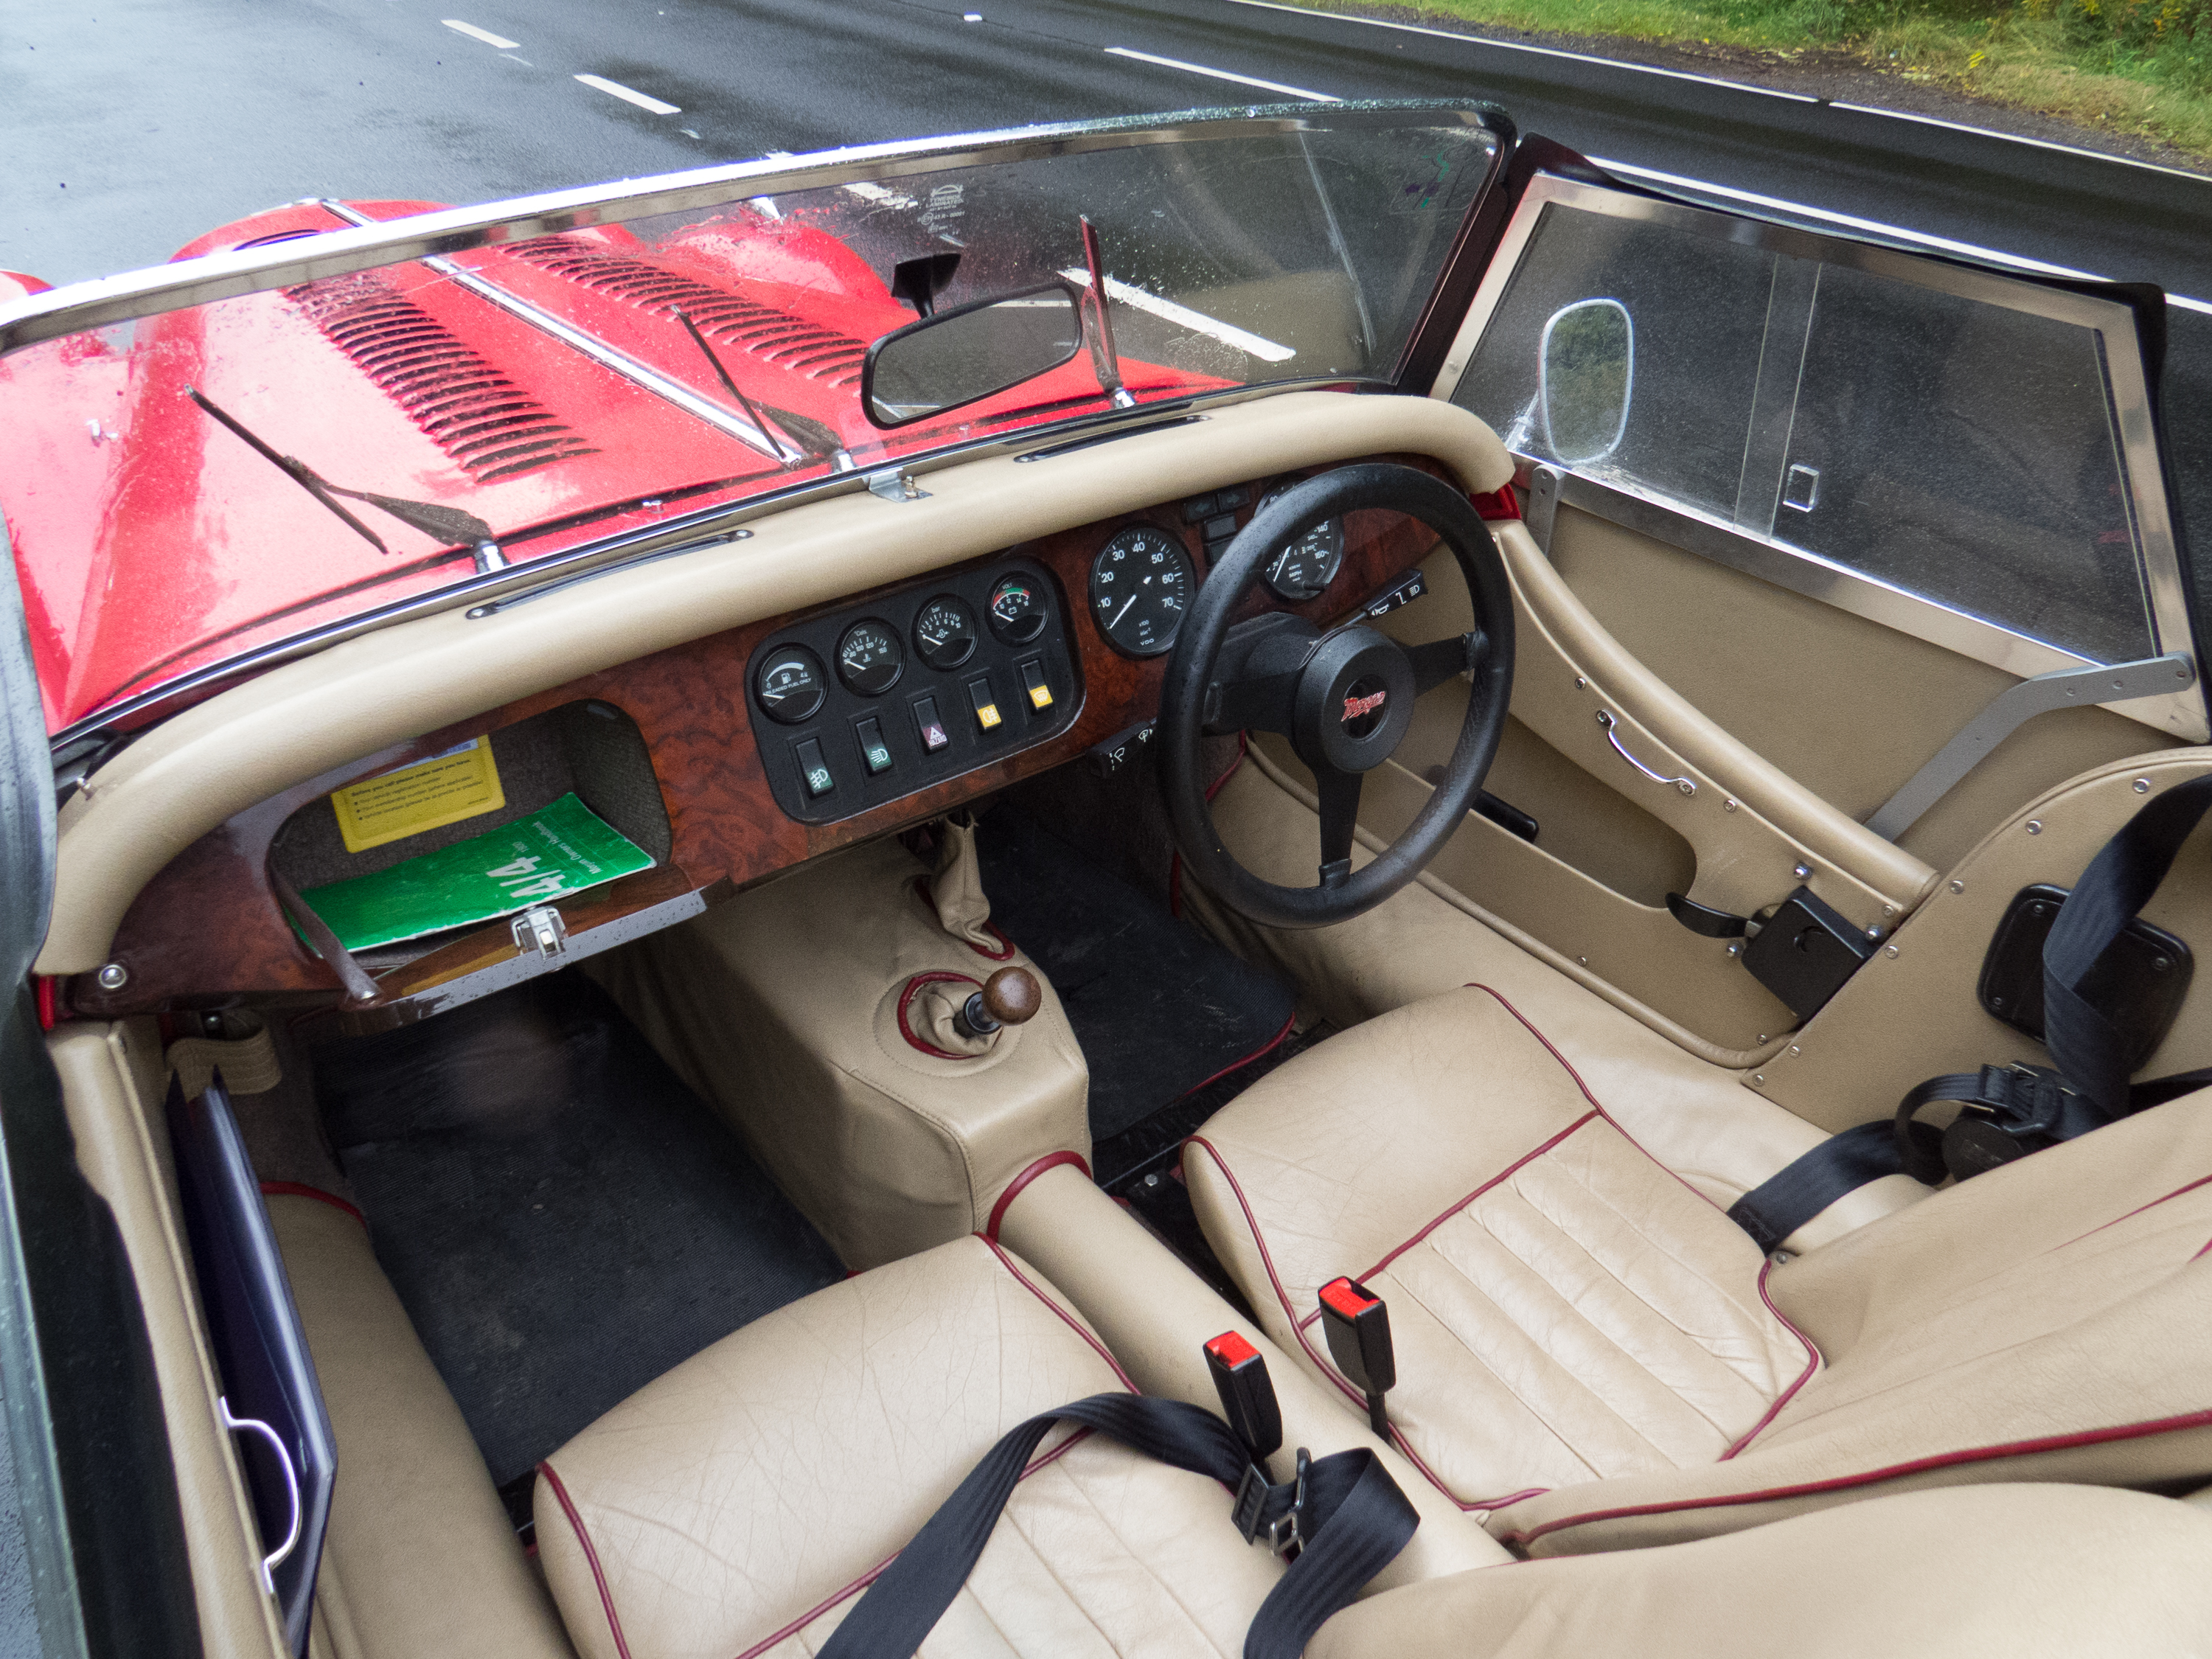 Timeless interior. There's even a radio!